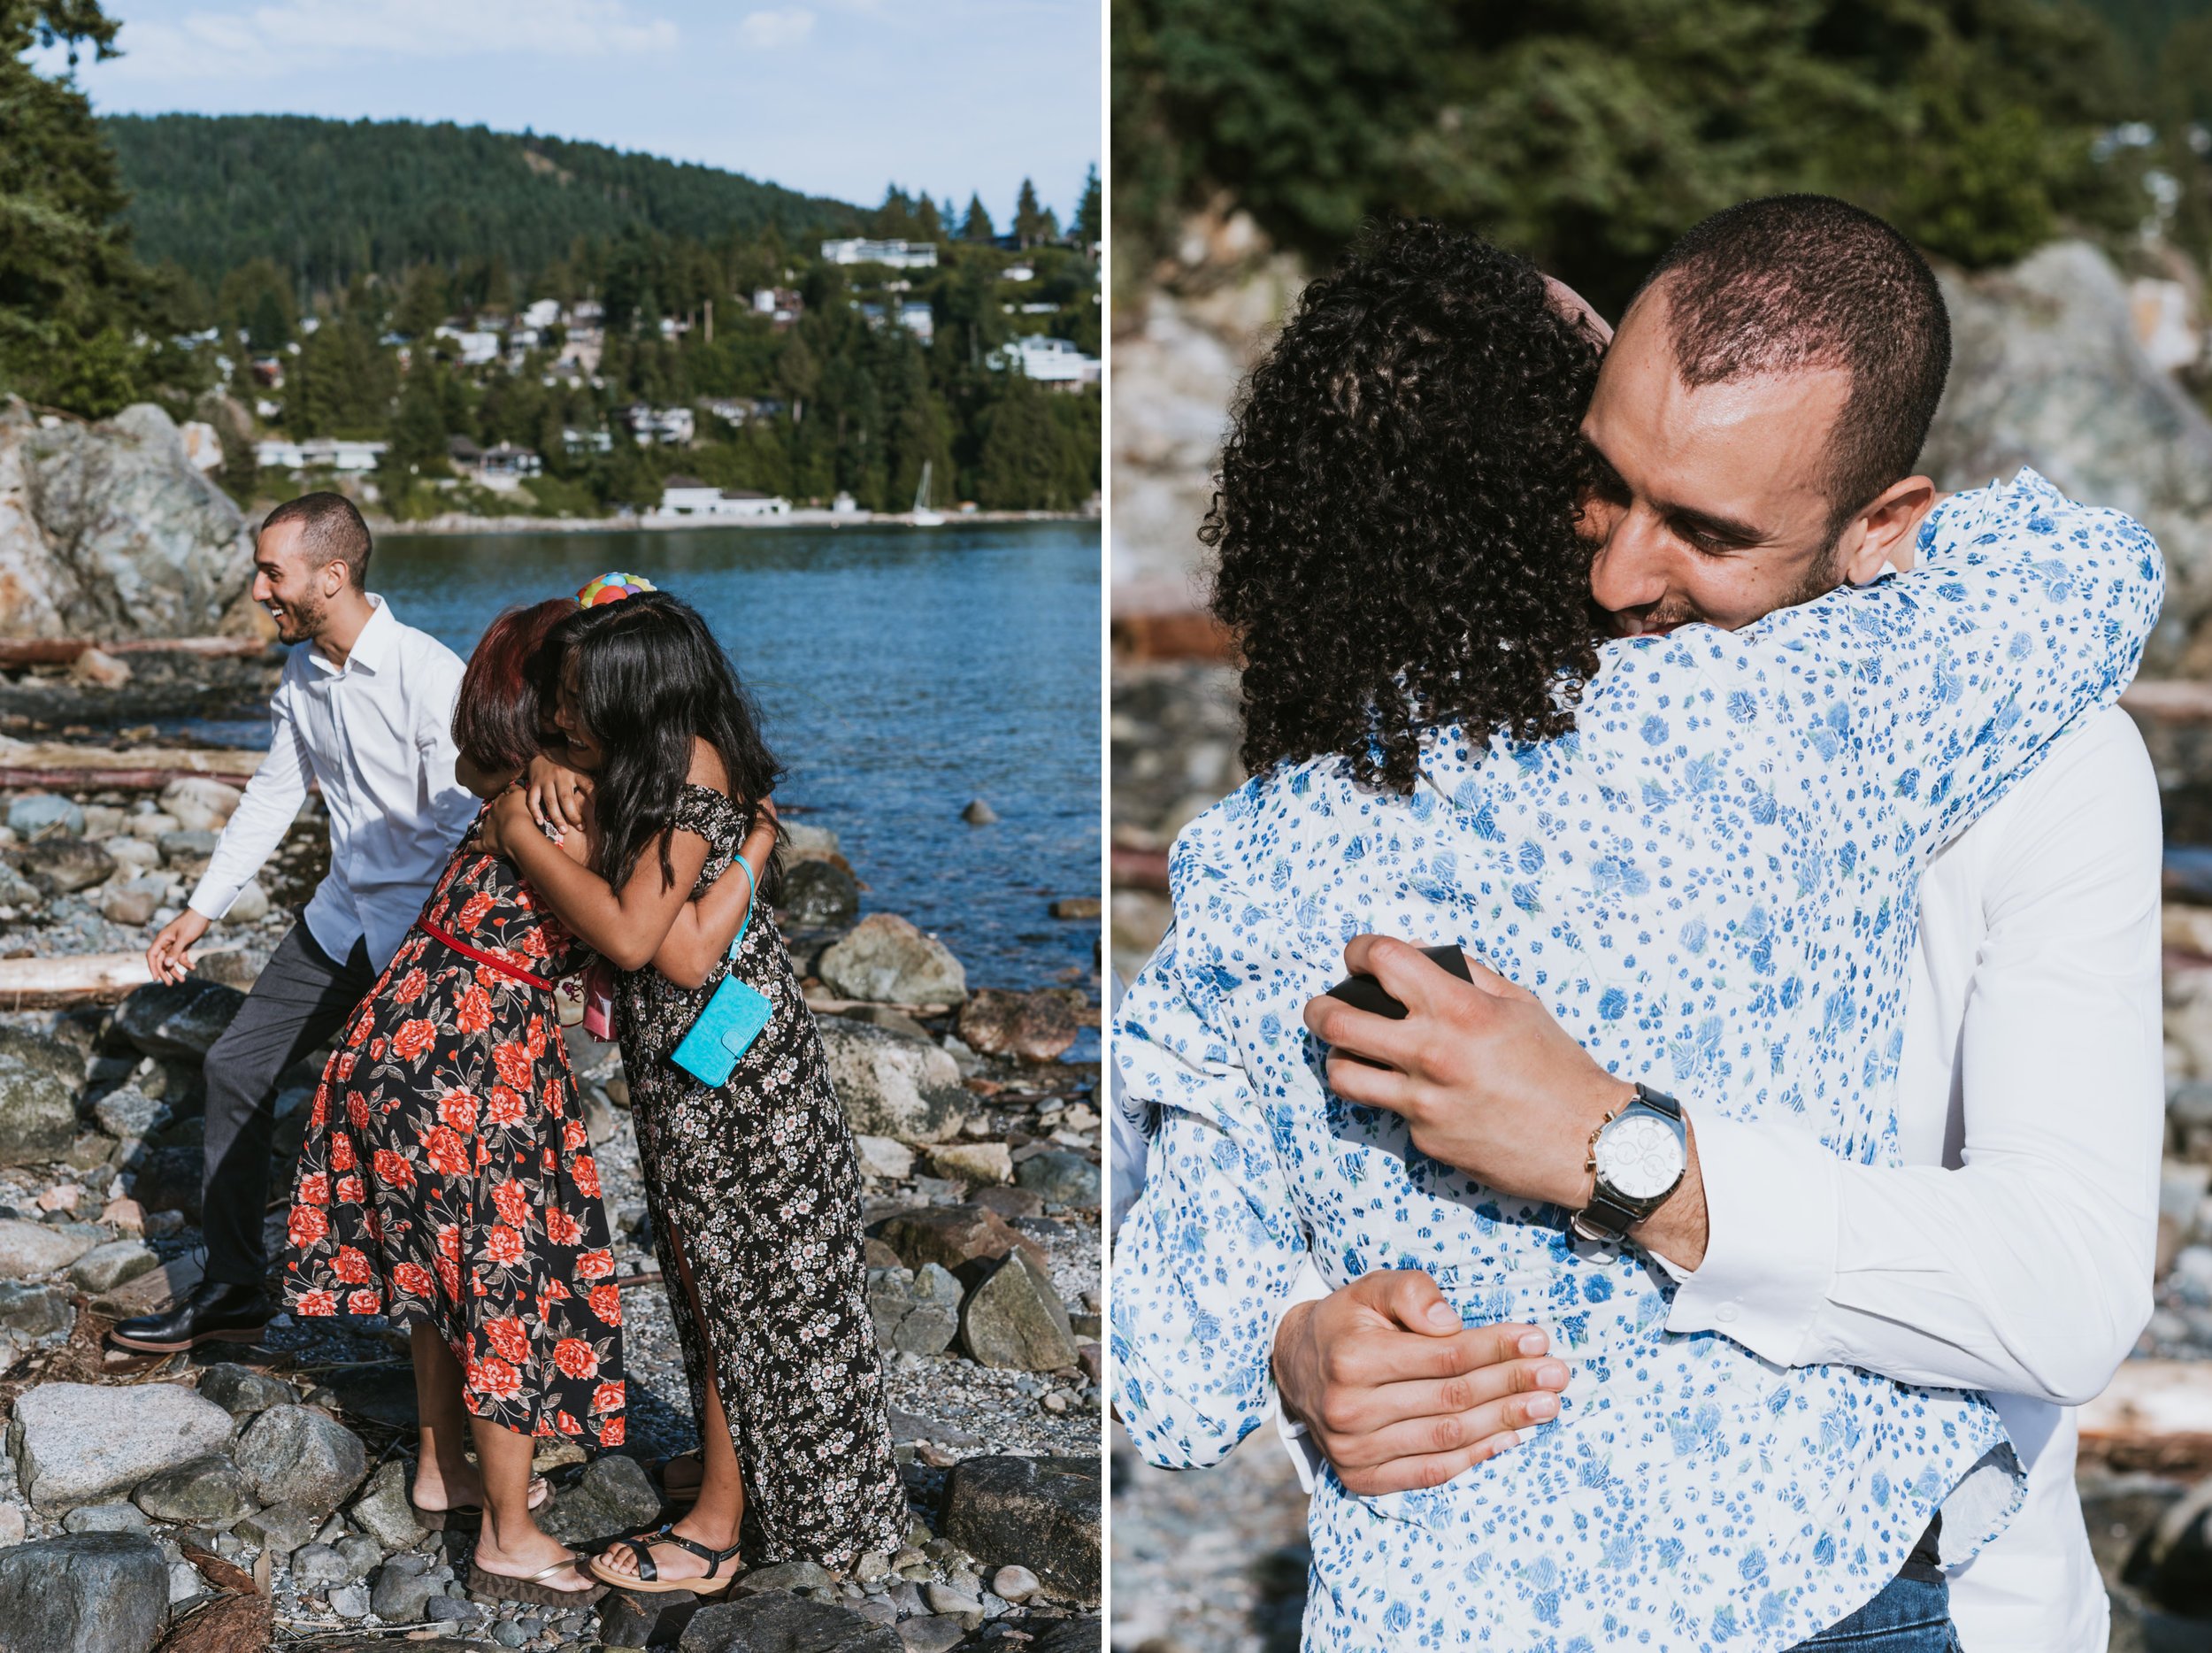 oliver-rabanes-vancouver-surrey-whytecliff-park-proposal-engagement-photography-21.jpg